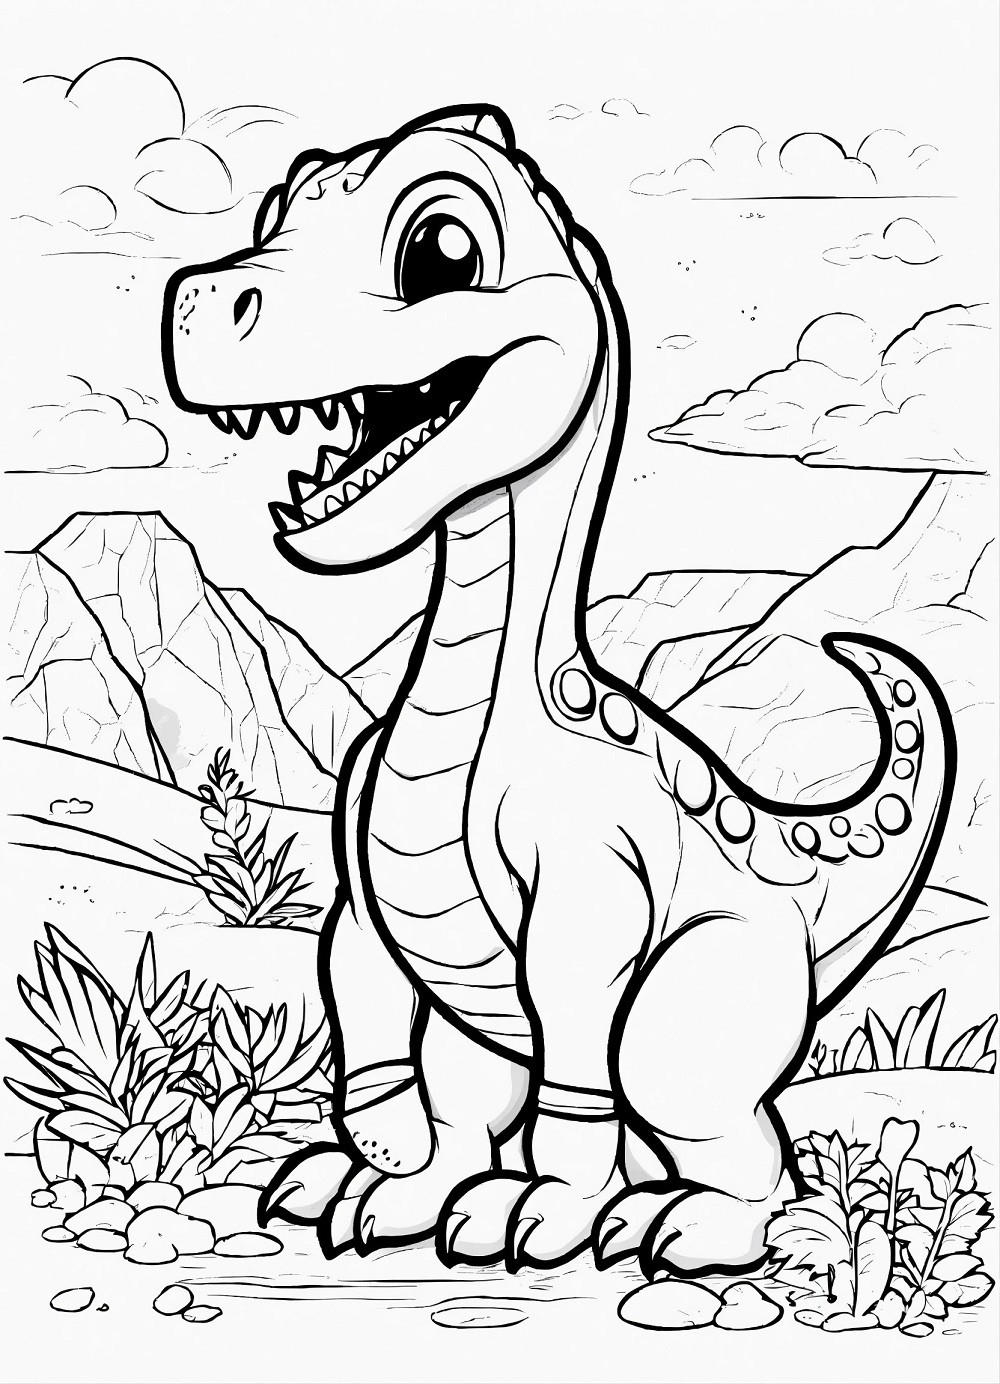 Dinosaurs Coloring Pages Free Online For Kids!